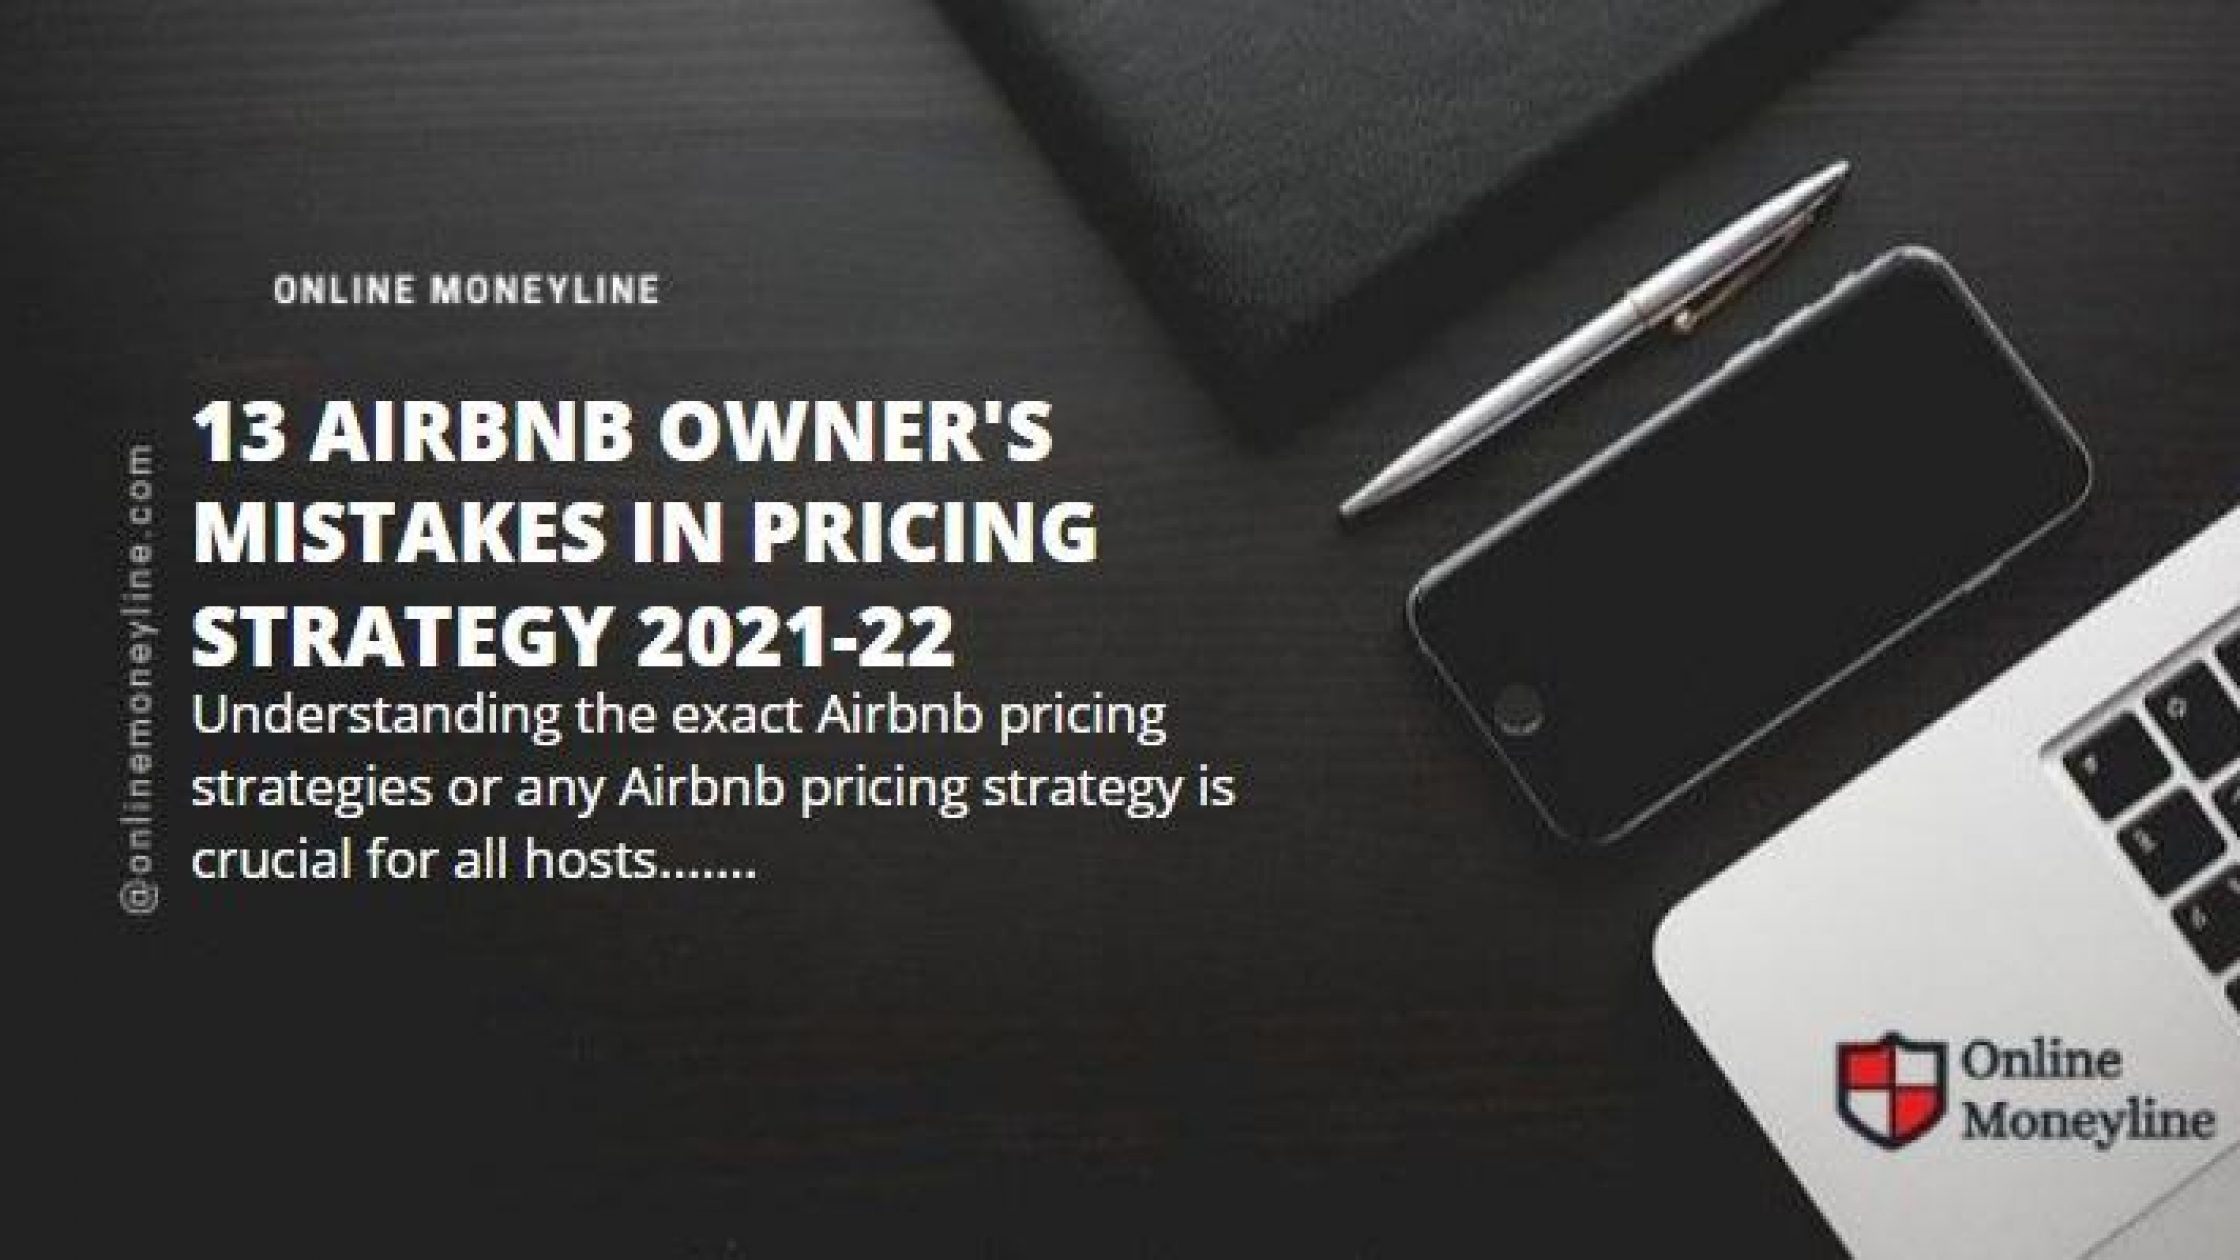 13 Airbnb Owner’s Mistakes in Pricing Strategy 2021-22